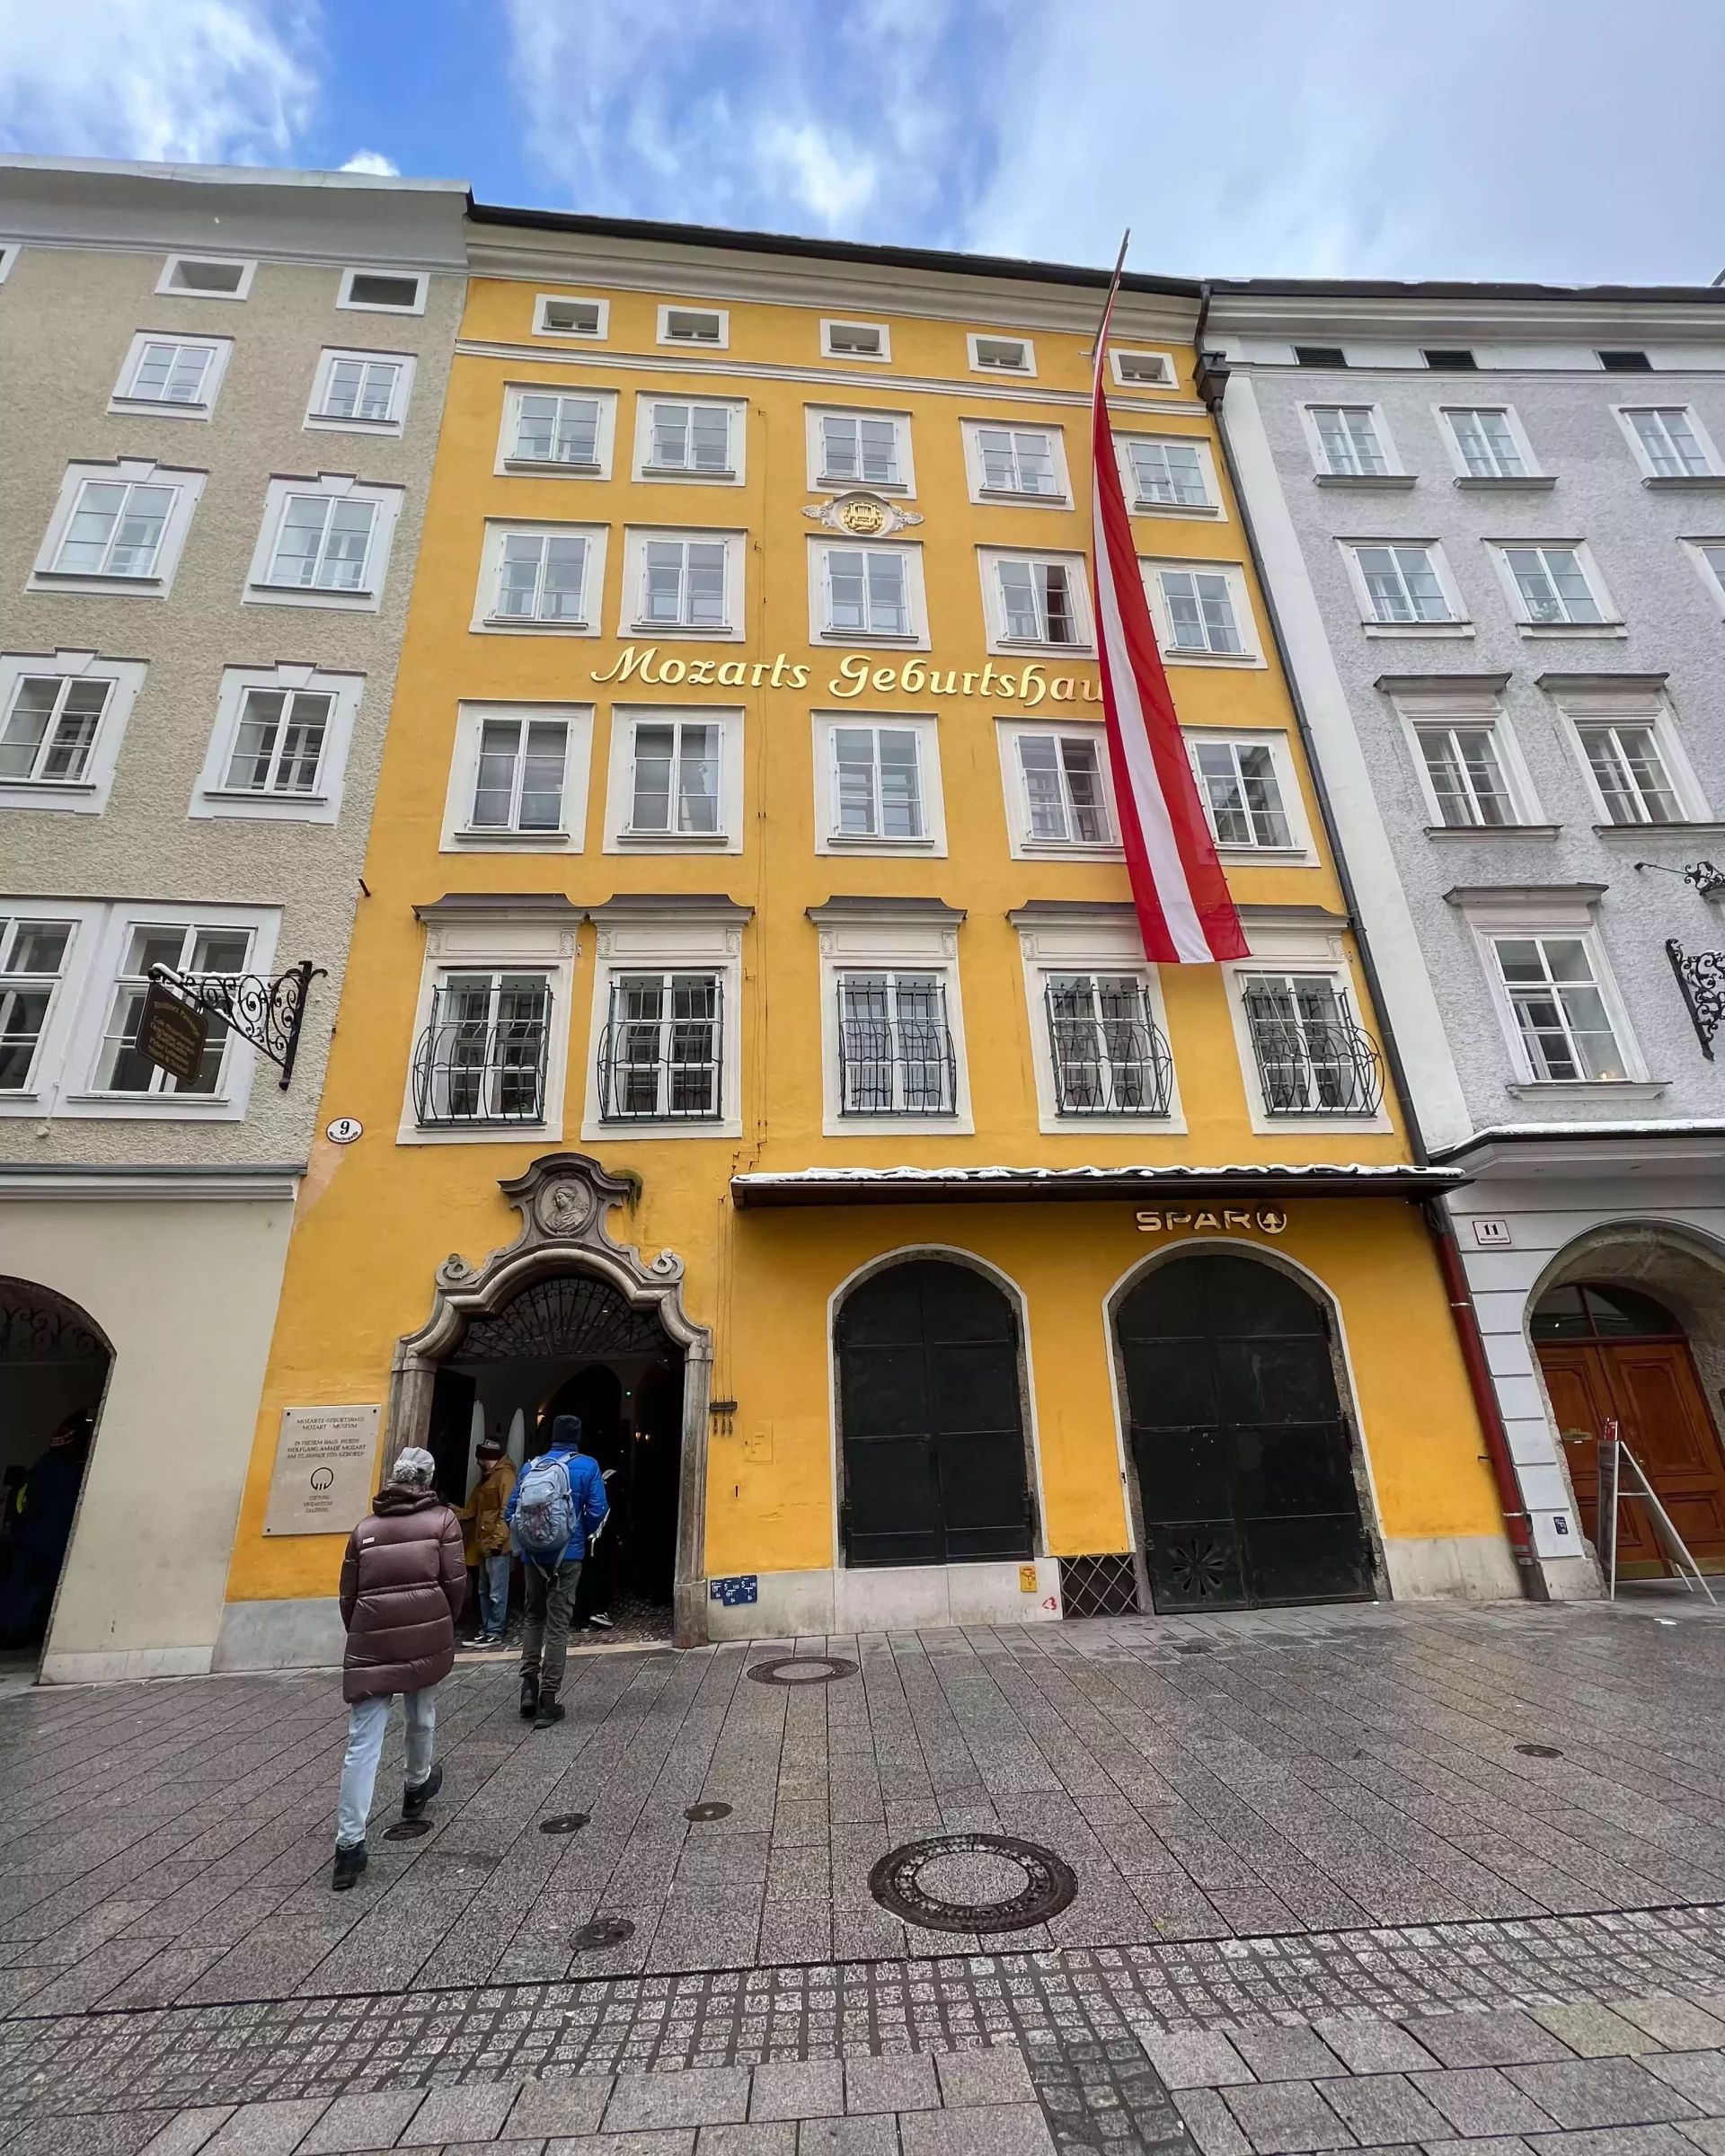 Mozart's Birthplace and Residence